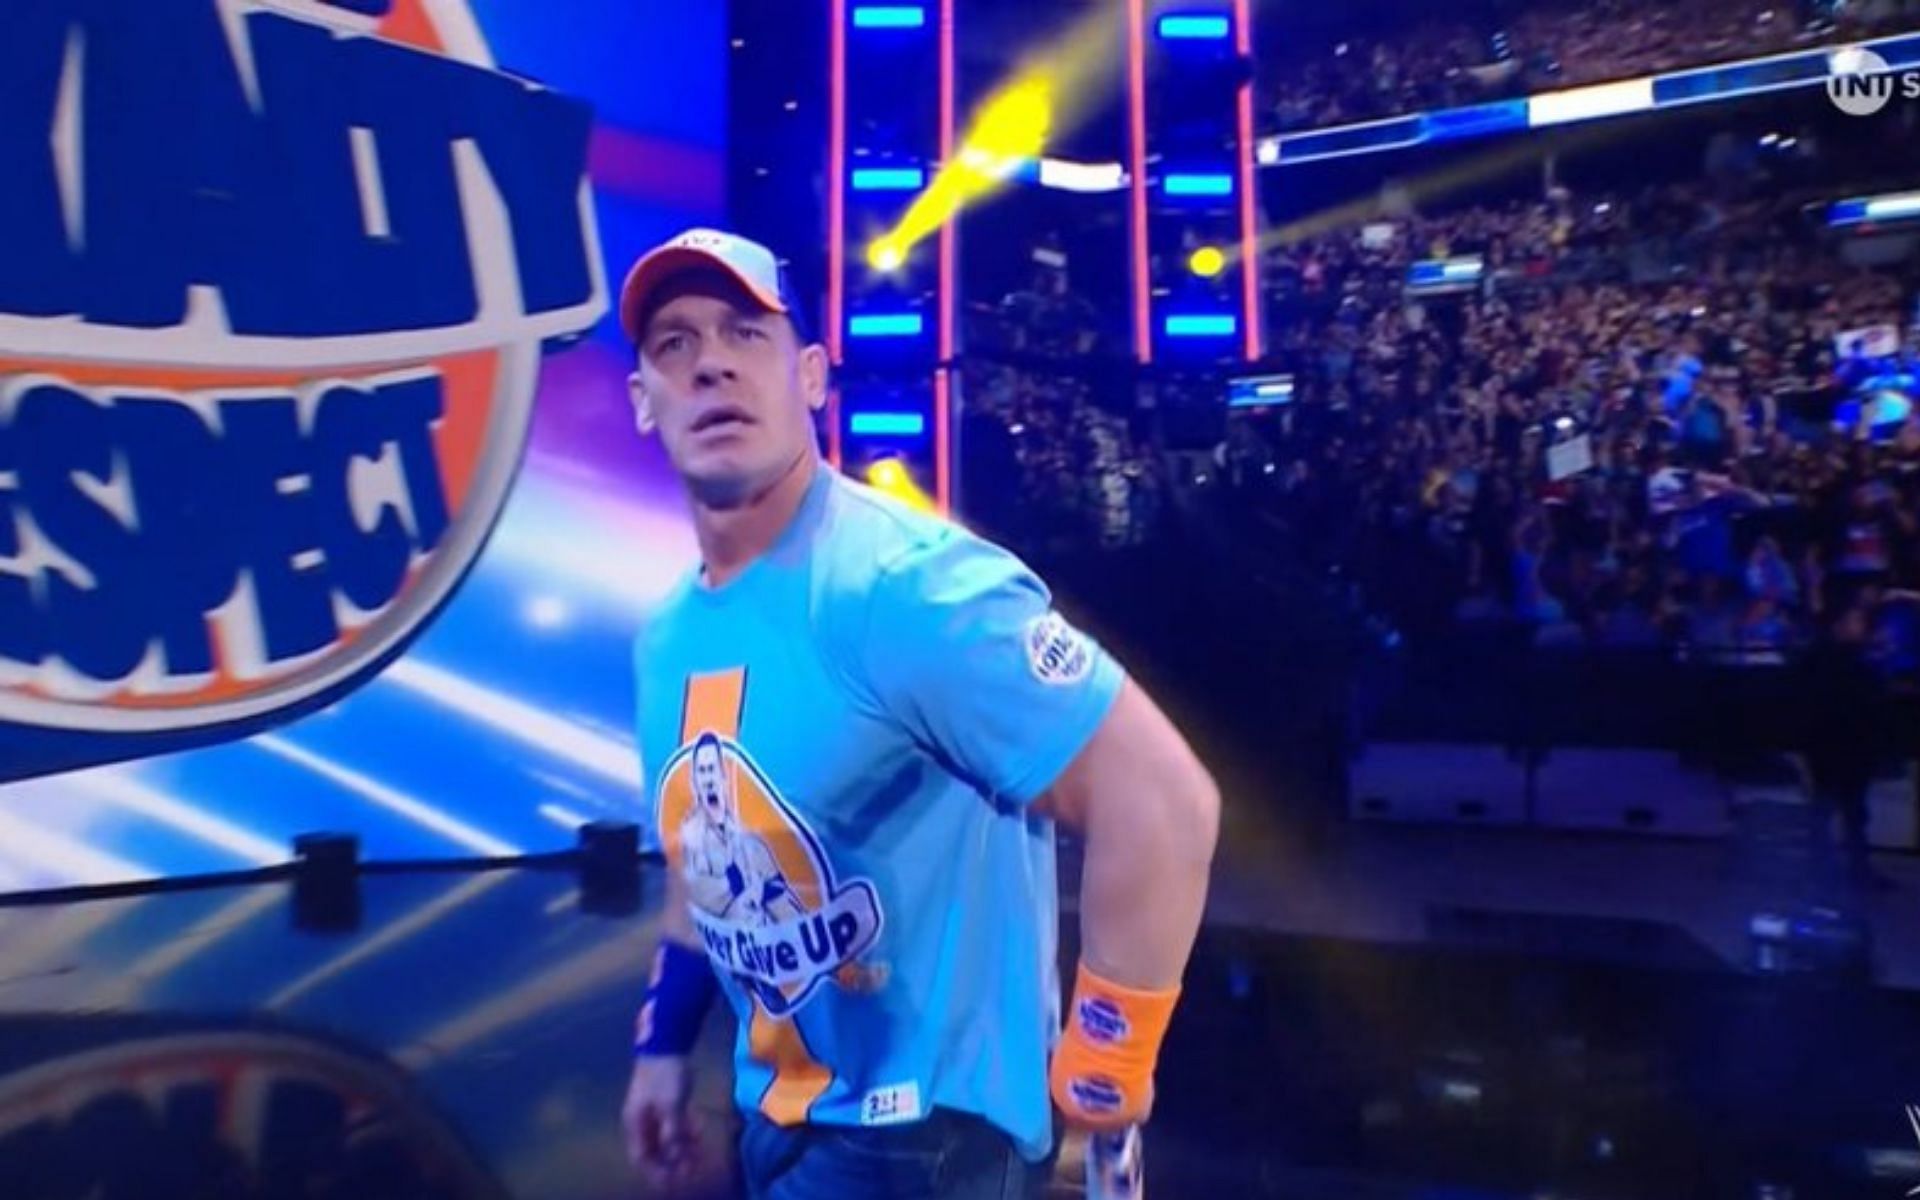 Cena was attacked by The Bloodline once again